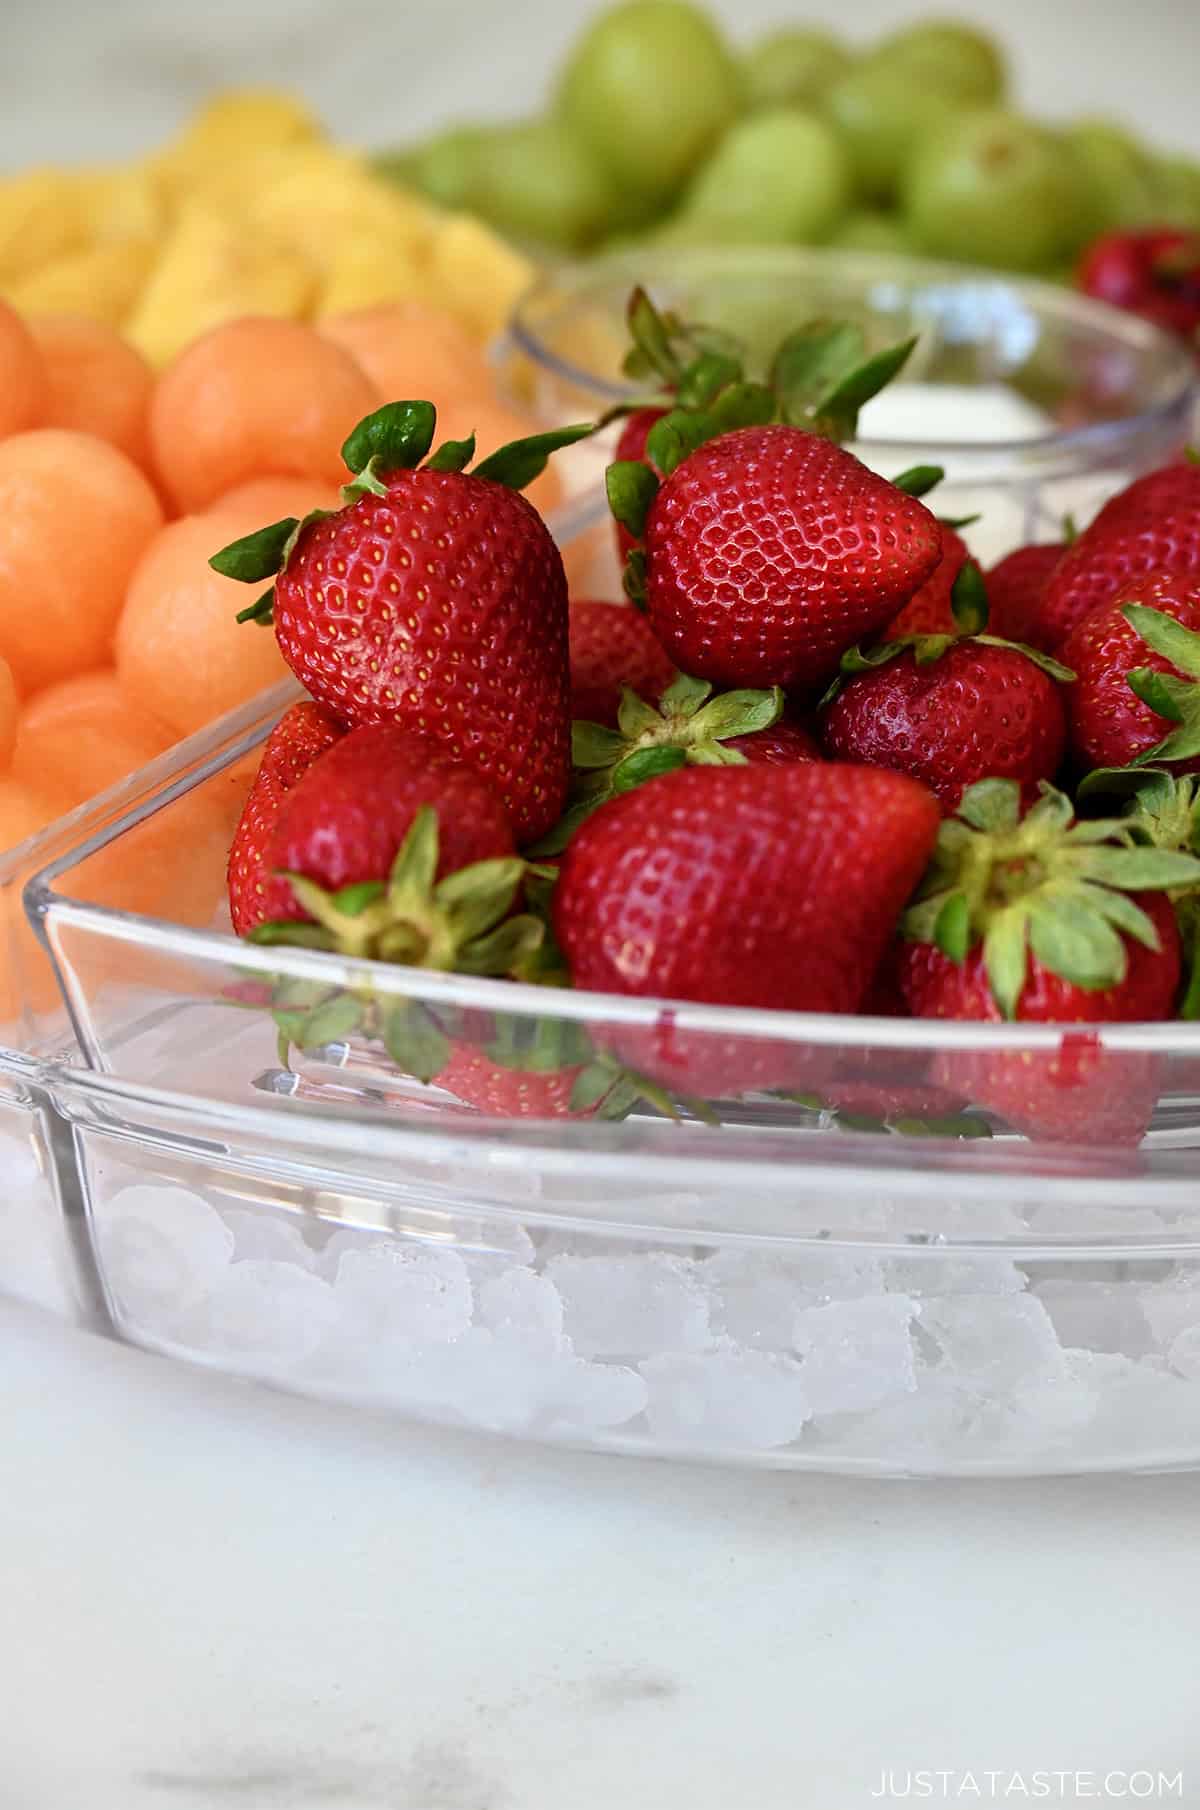 Fresh strawberries in a serving tray over ice.